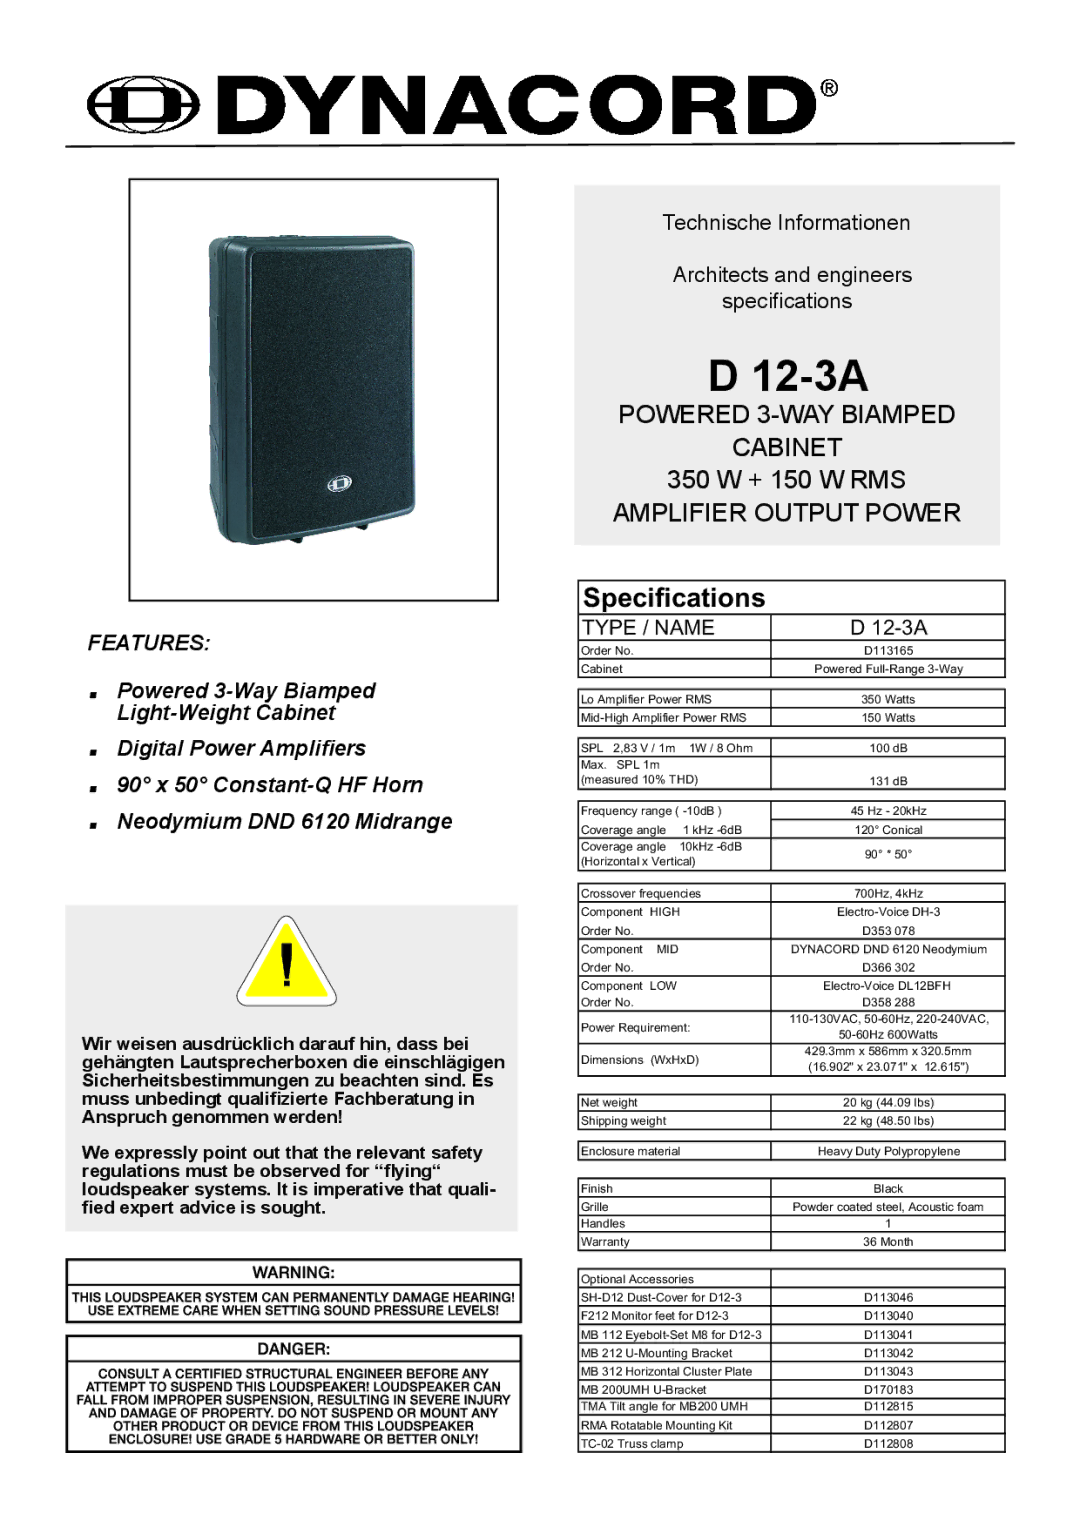 Dynacord D 12-3A specifications 